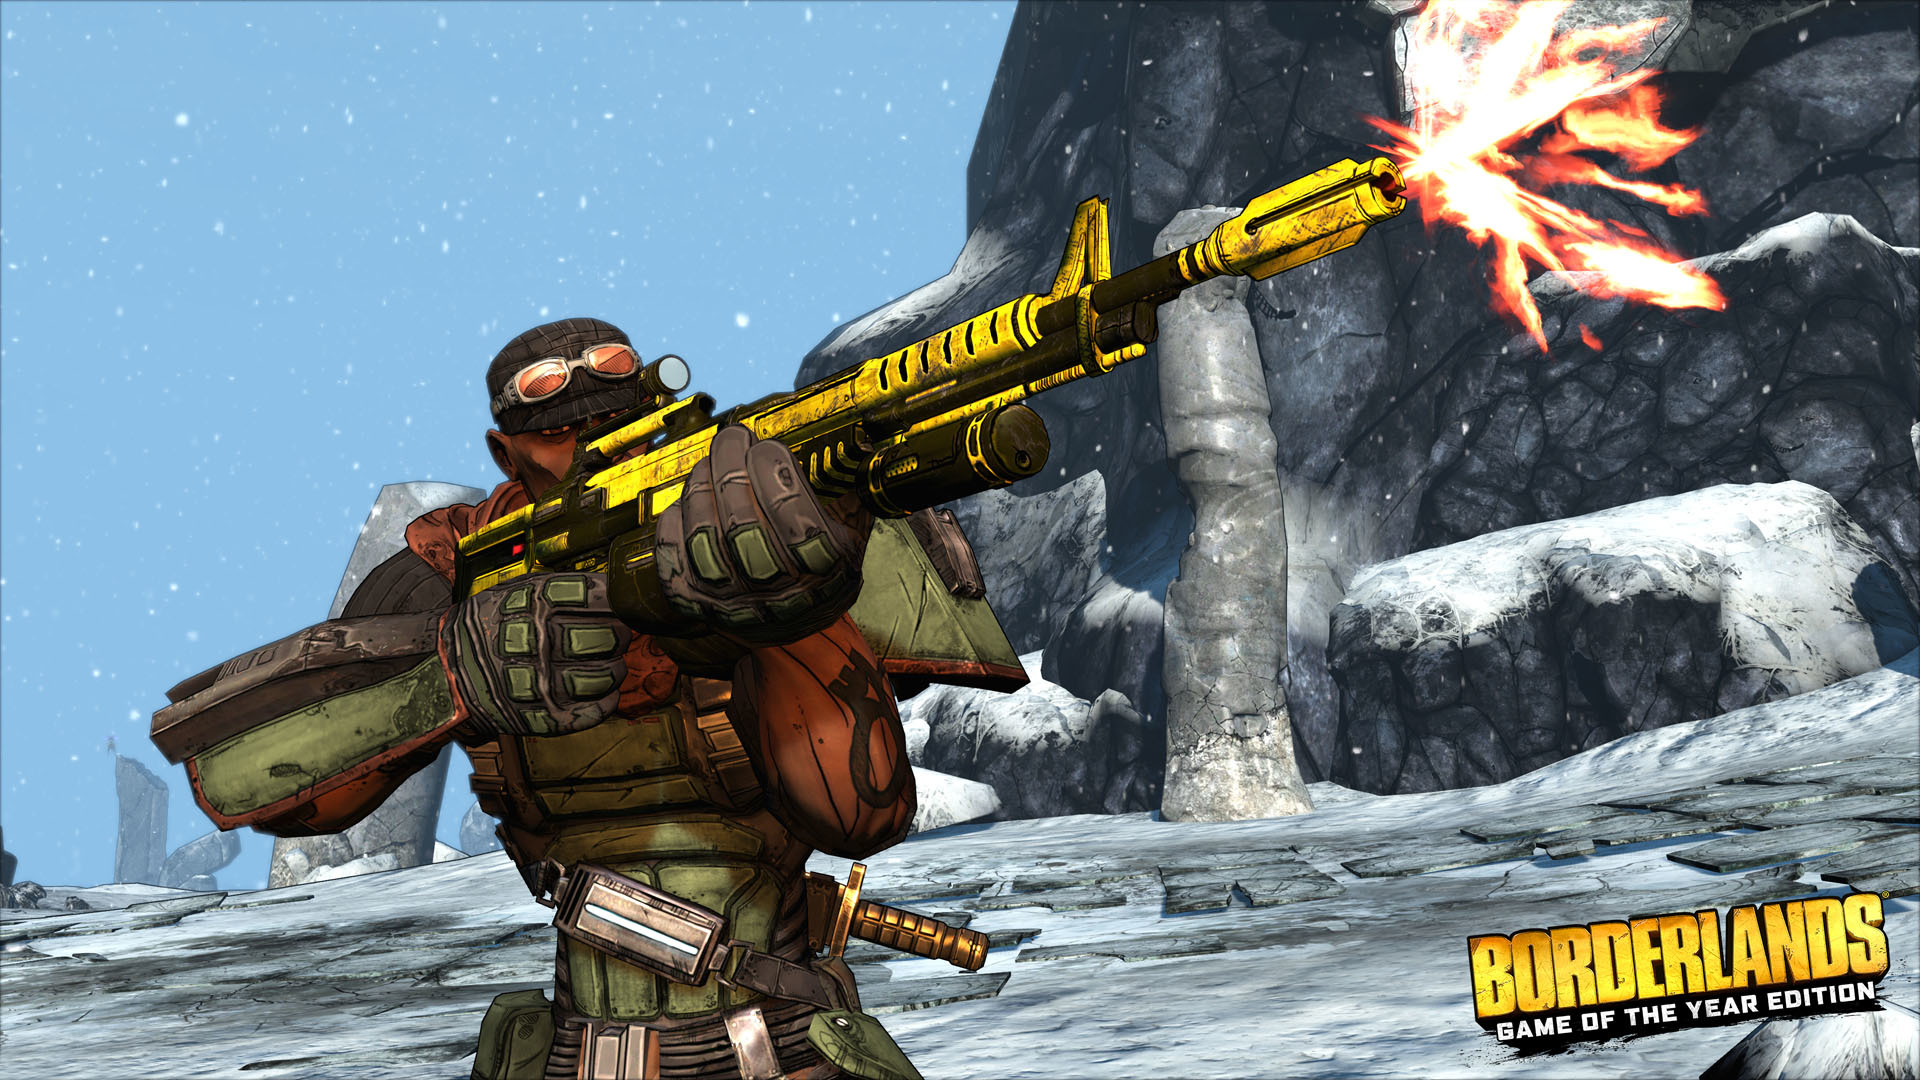 Borderlands: Game of the Year Edition Suffering Matchmaking Issues, Gearbox Working on a Fix